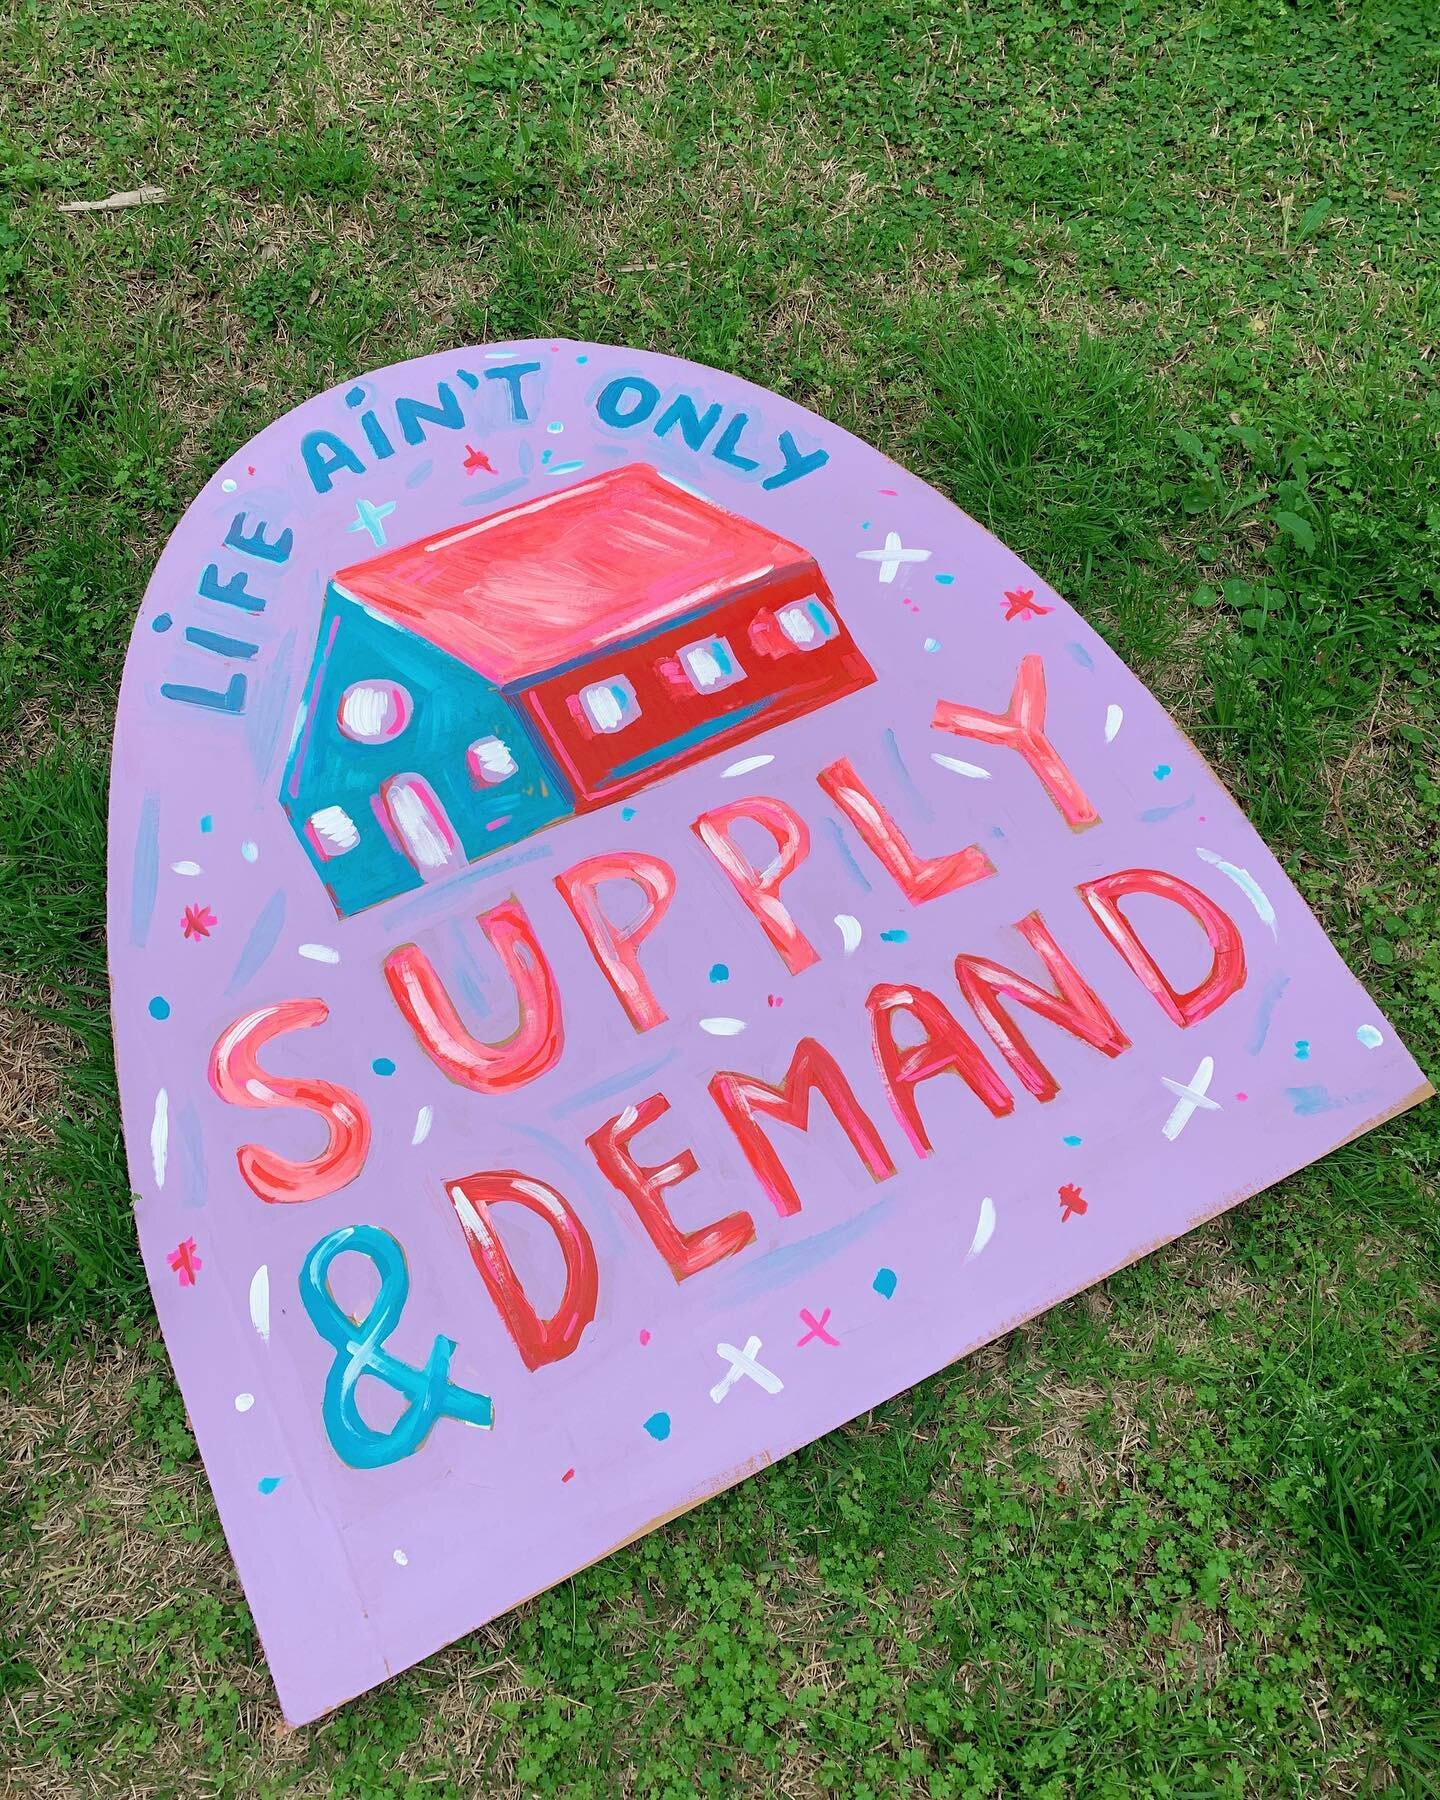 ✨Life ain&rsquo;t only✨
👐👐👐👐👐SUPPLY &amp; DEMAND👐👐👐👐👐

(&amp; Amos Lee on repeat even makes the cone of shame bearable)